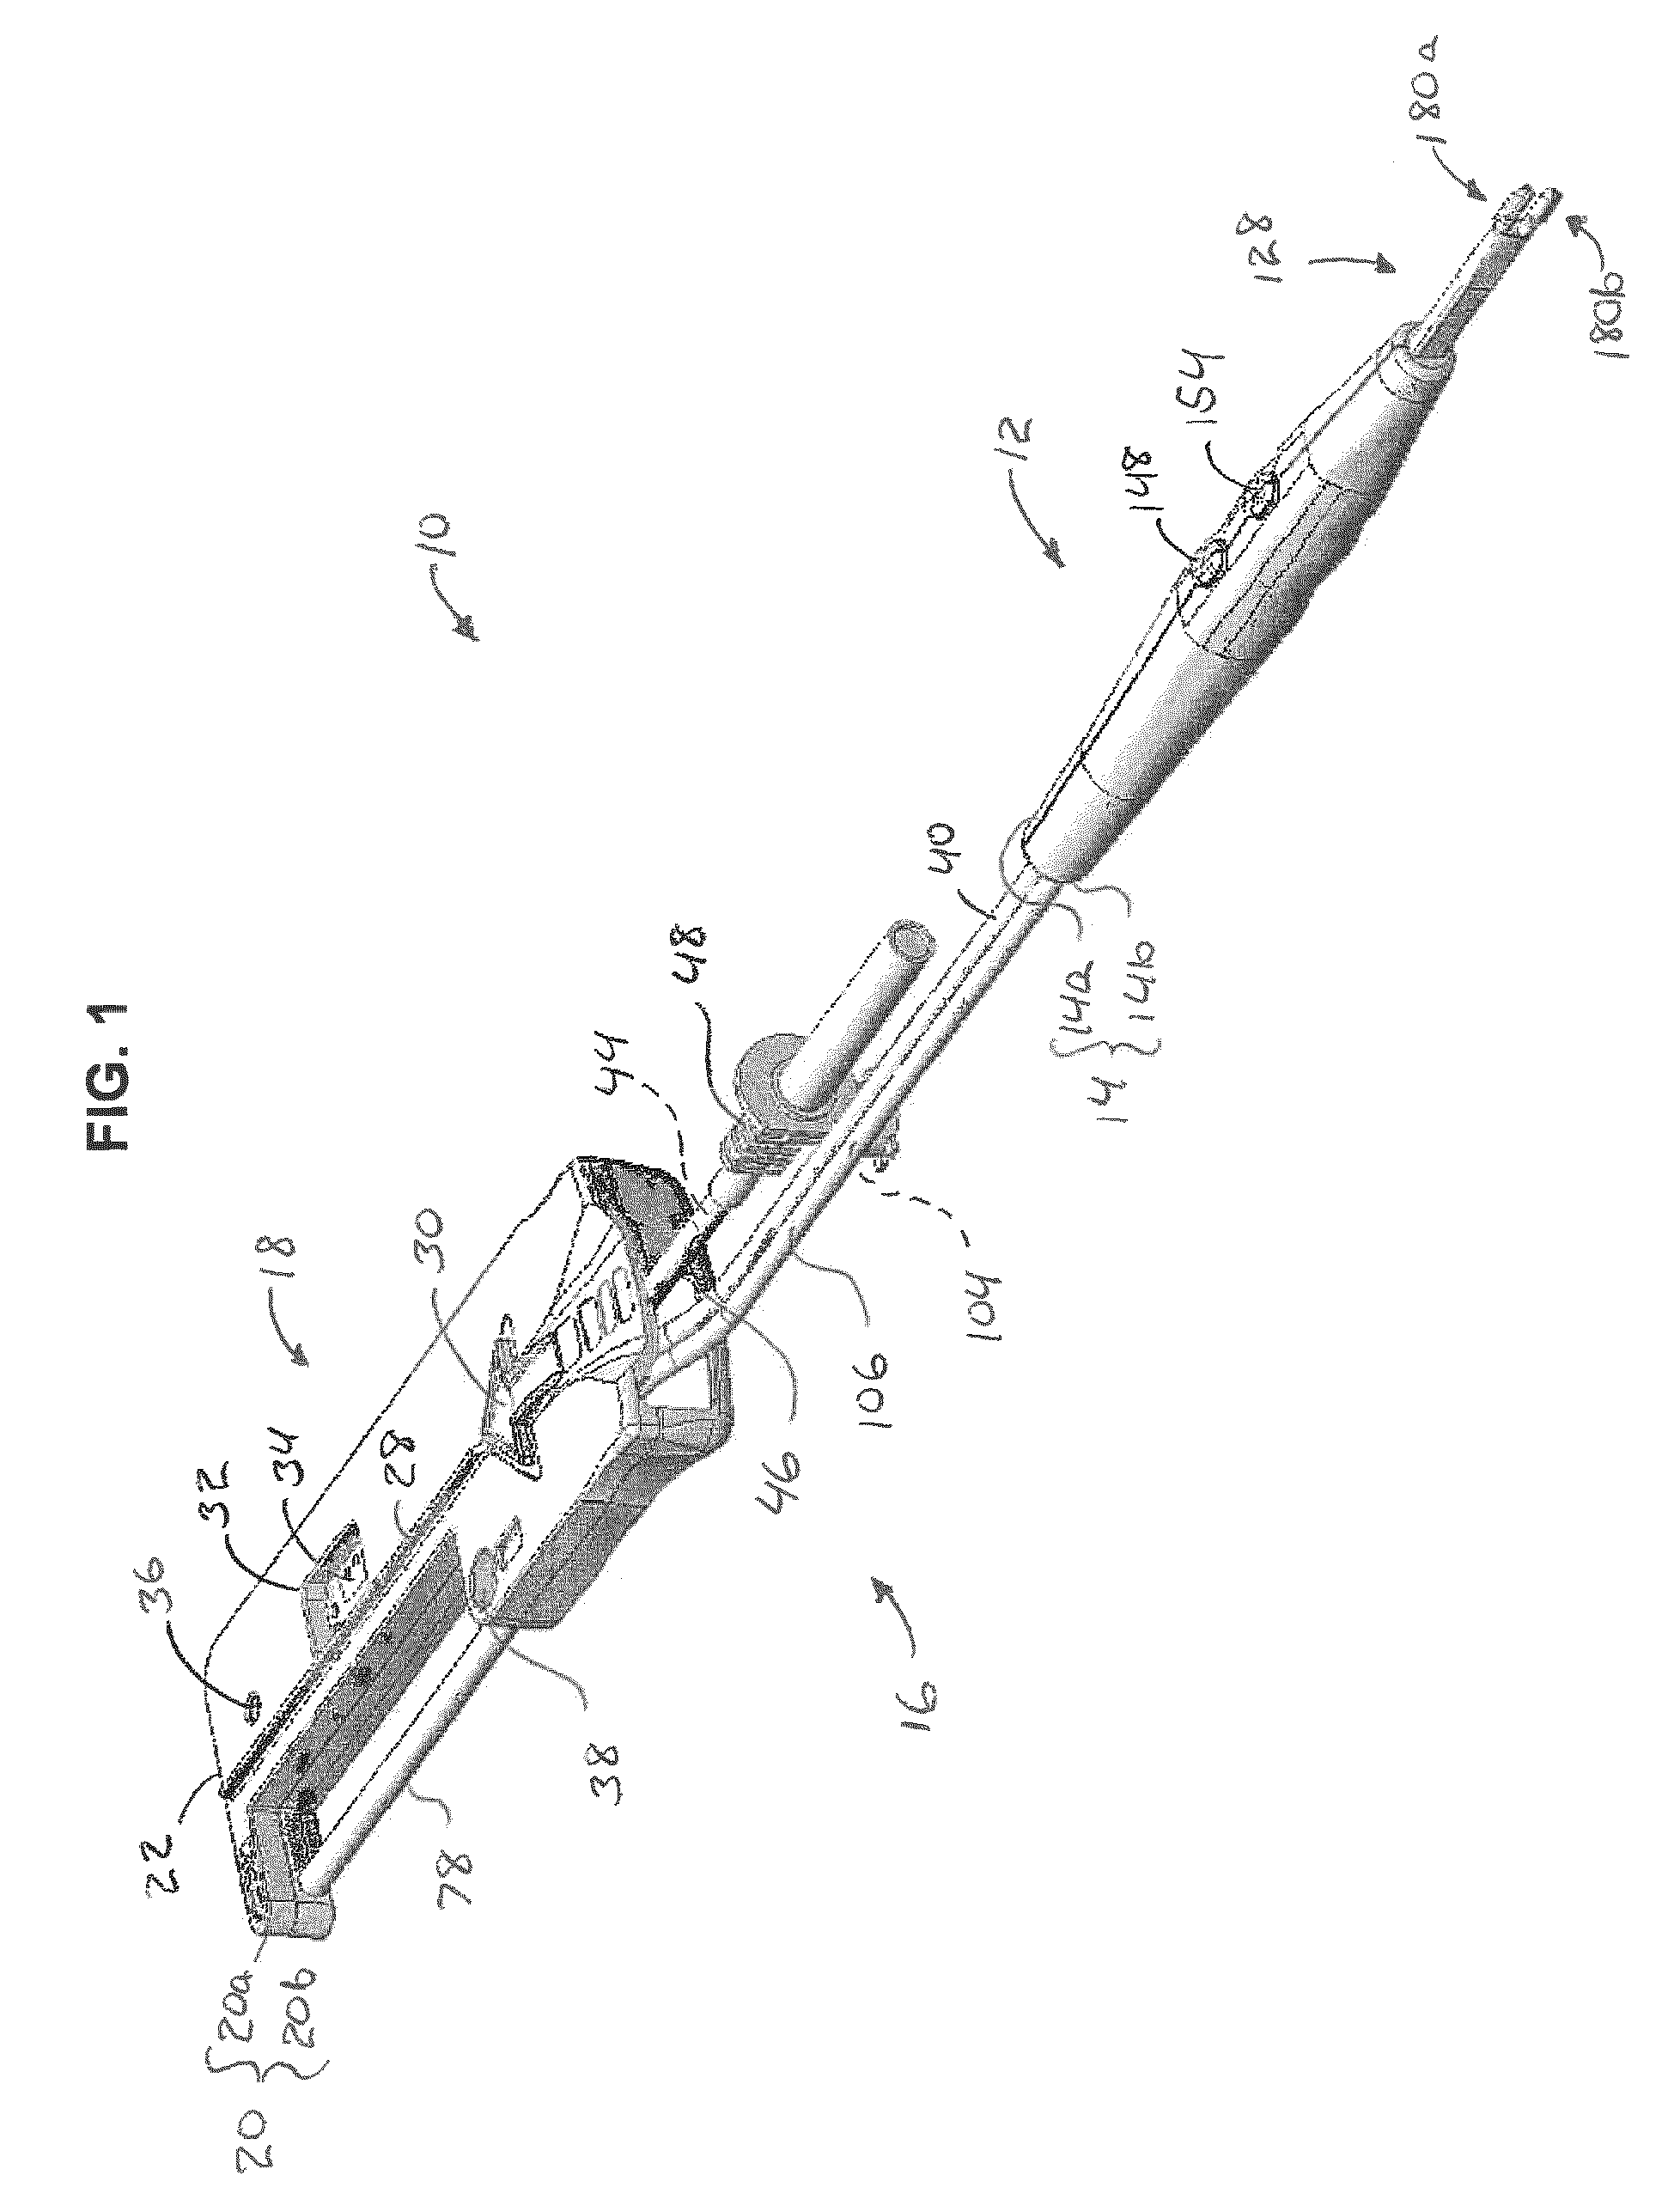 Electrosurgical devices, electrosurgical unit and methods of use thereof